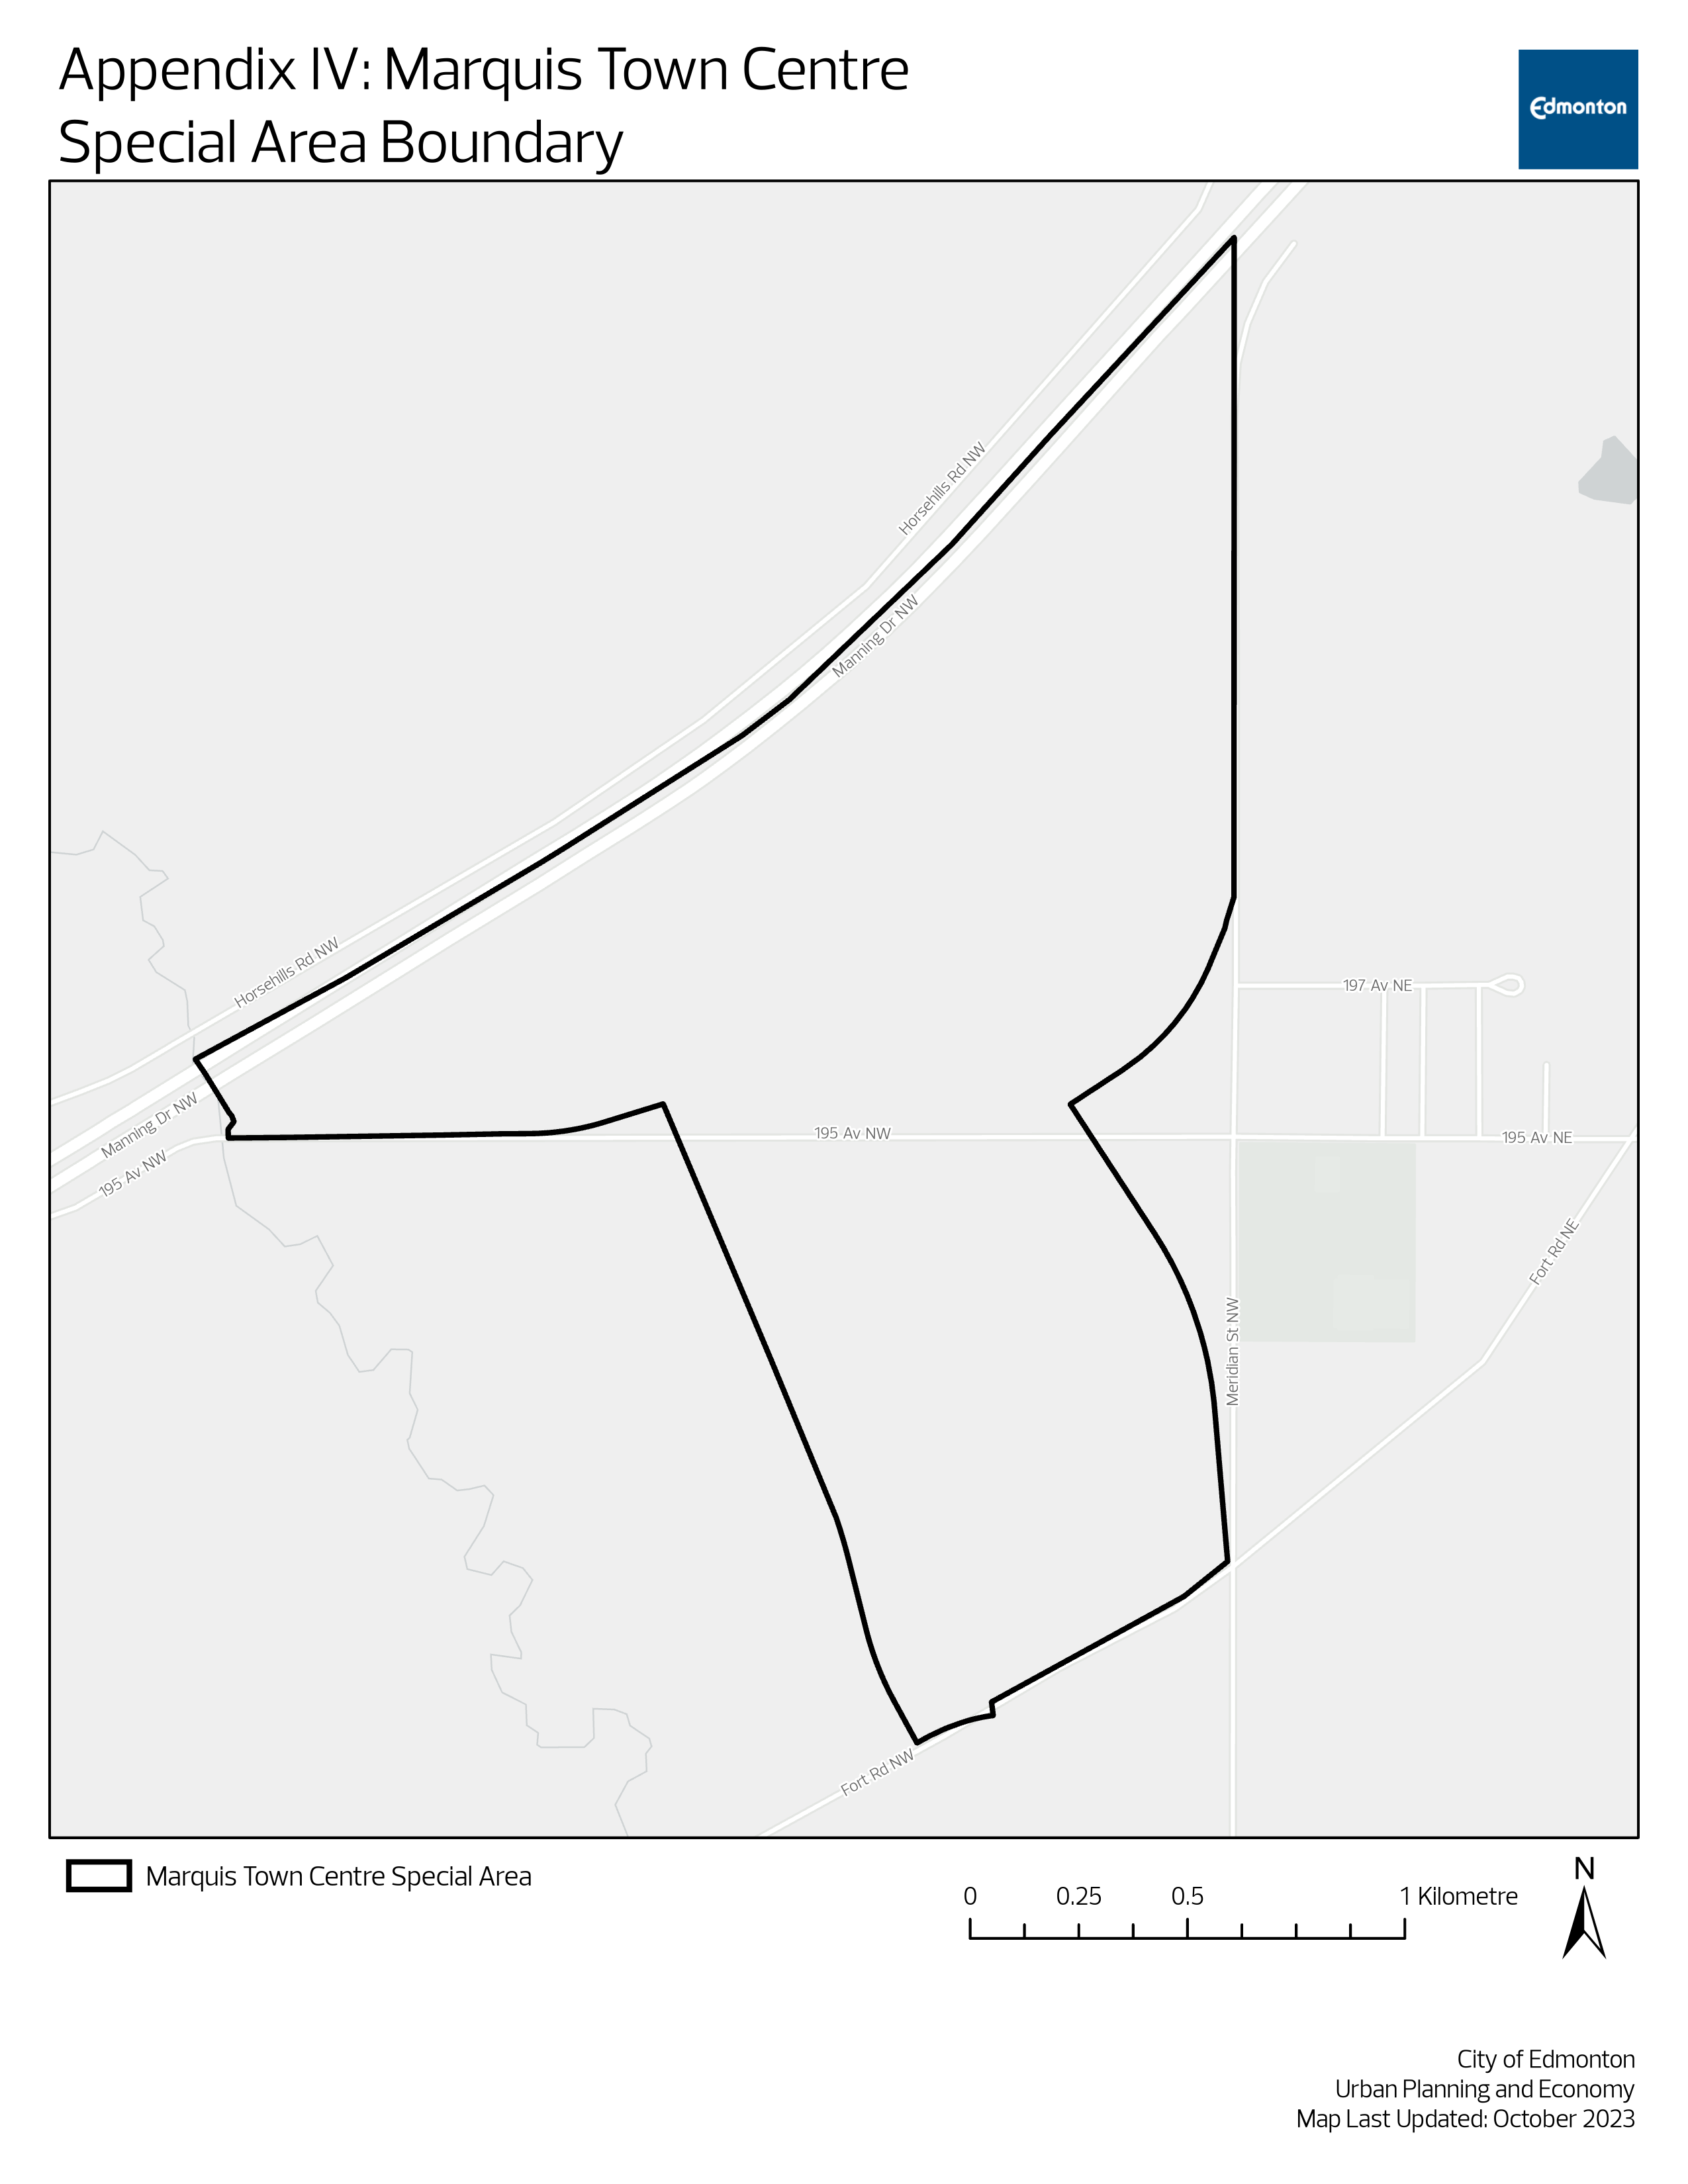 Marquis Town Centre Special Area boundary map